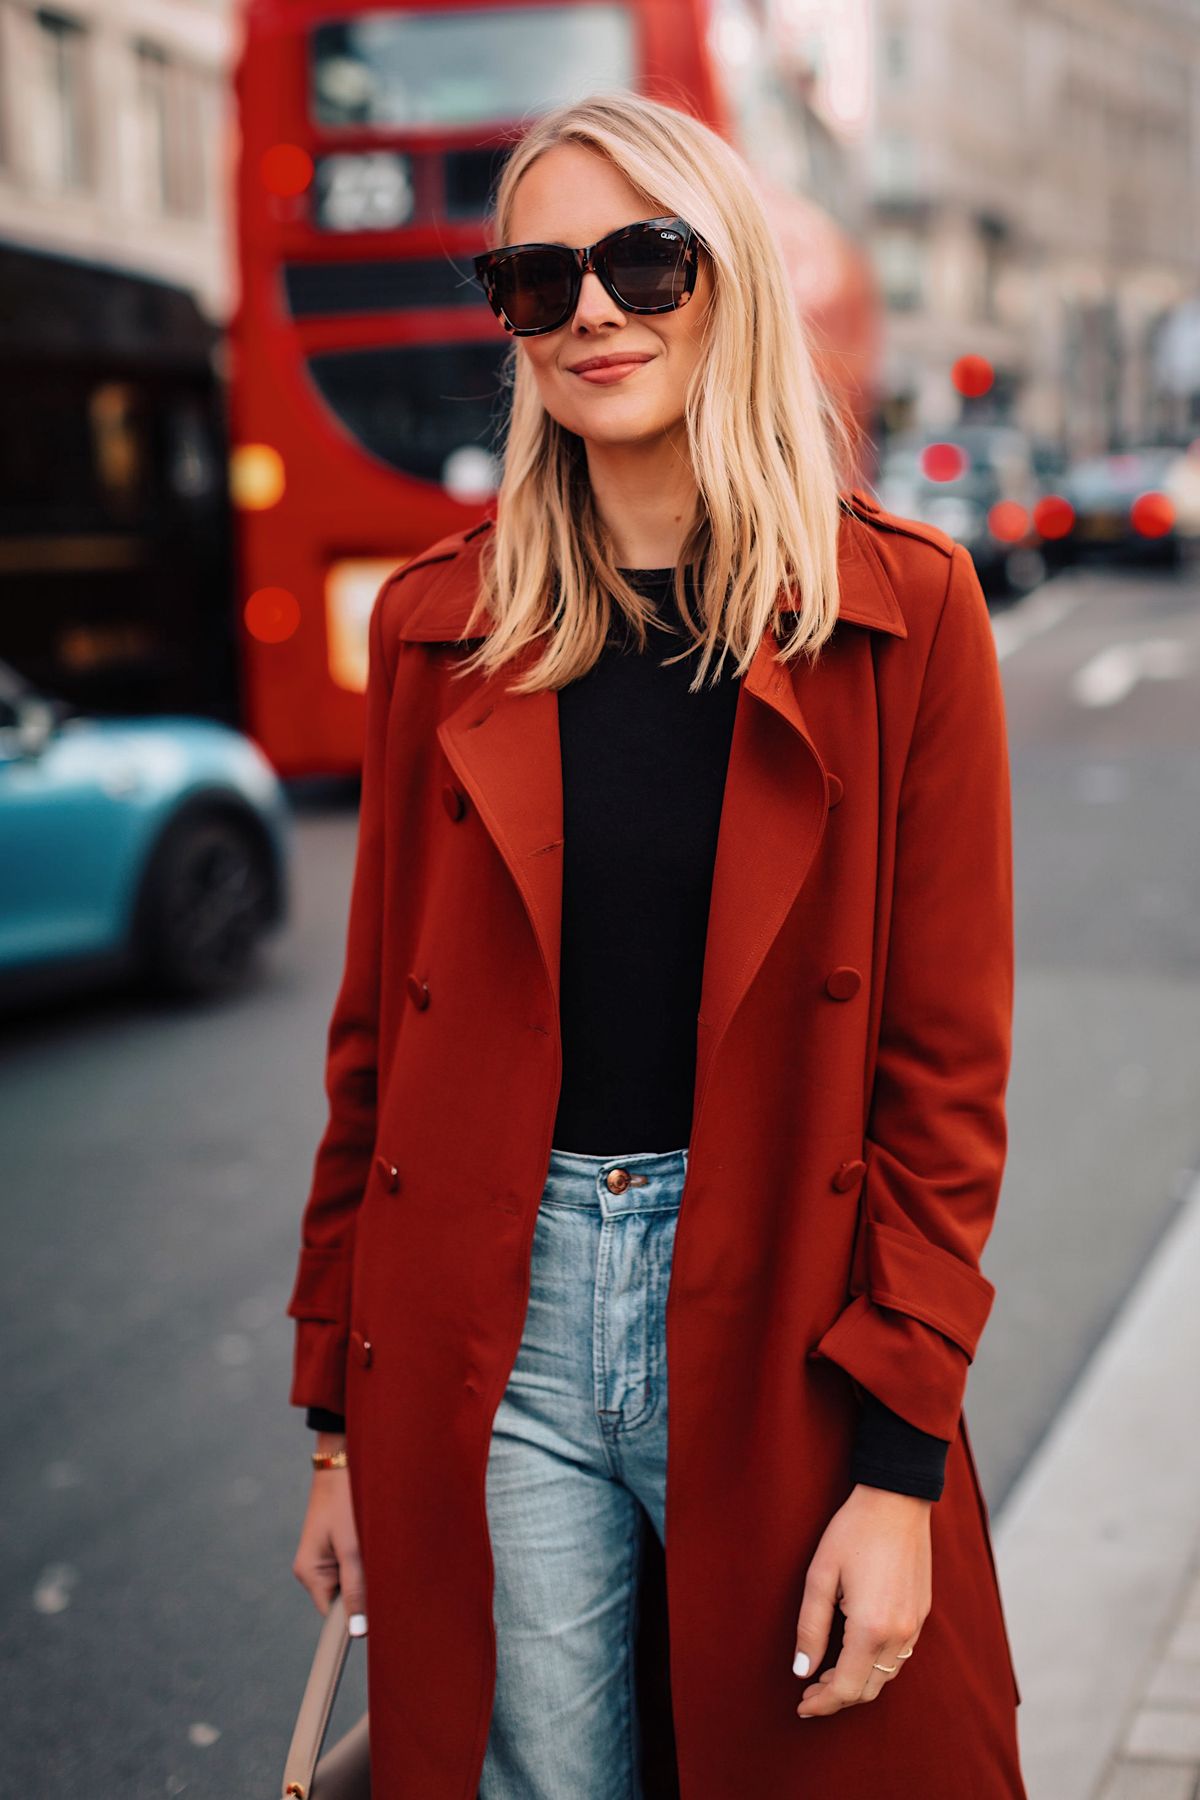 Blonde Woman Wearing Red Trench Coat Black Top Jeans Outfit Fashion Jackson San Diego Fashion Blogger London Street Style